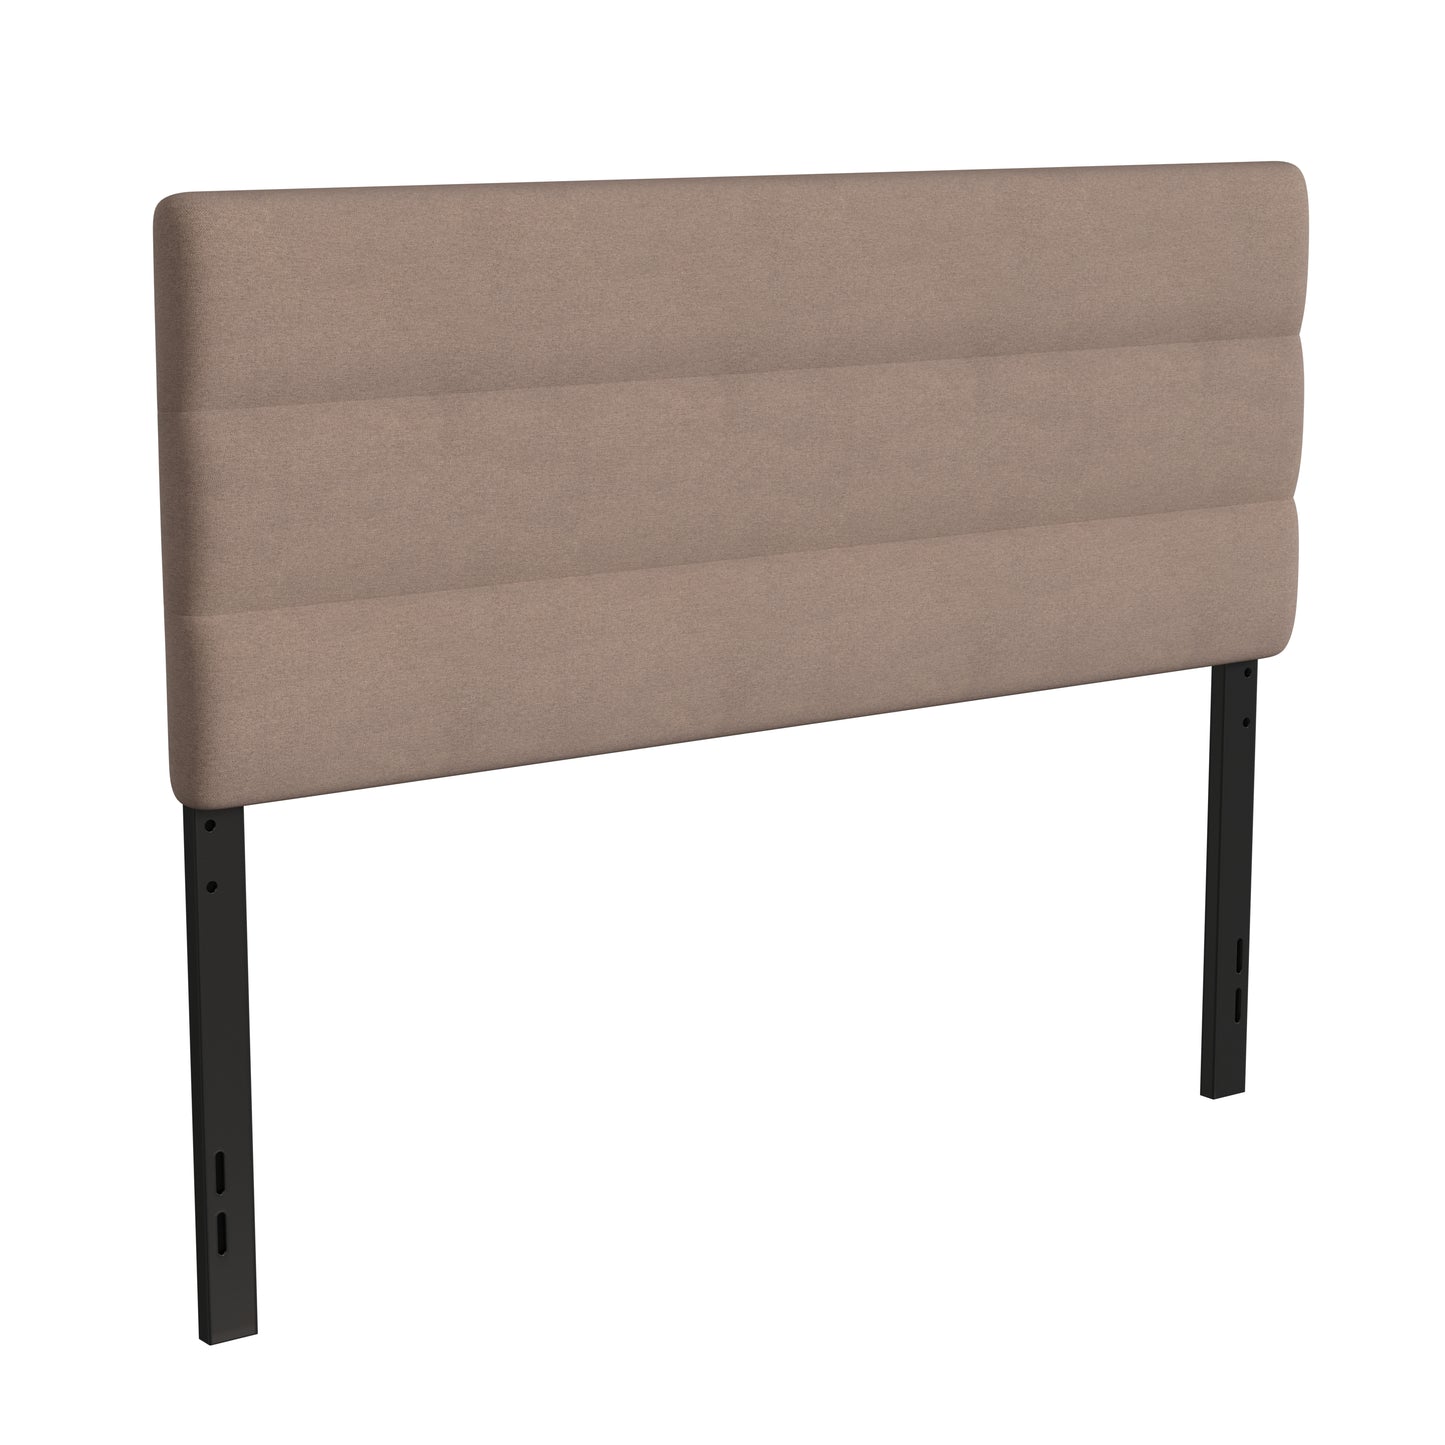 Taupe Tufted Queen Headboard TW-3WLHB21-TAN-Q-GG